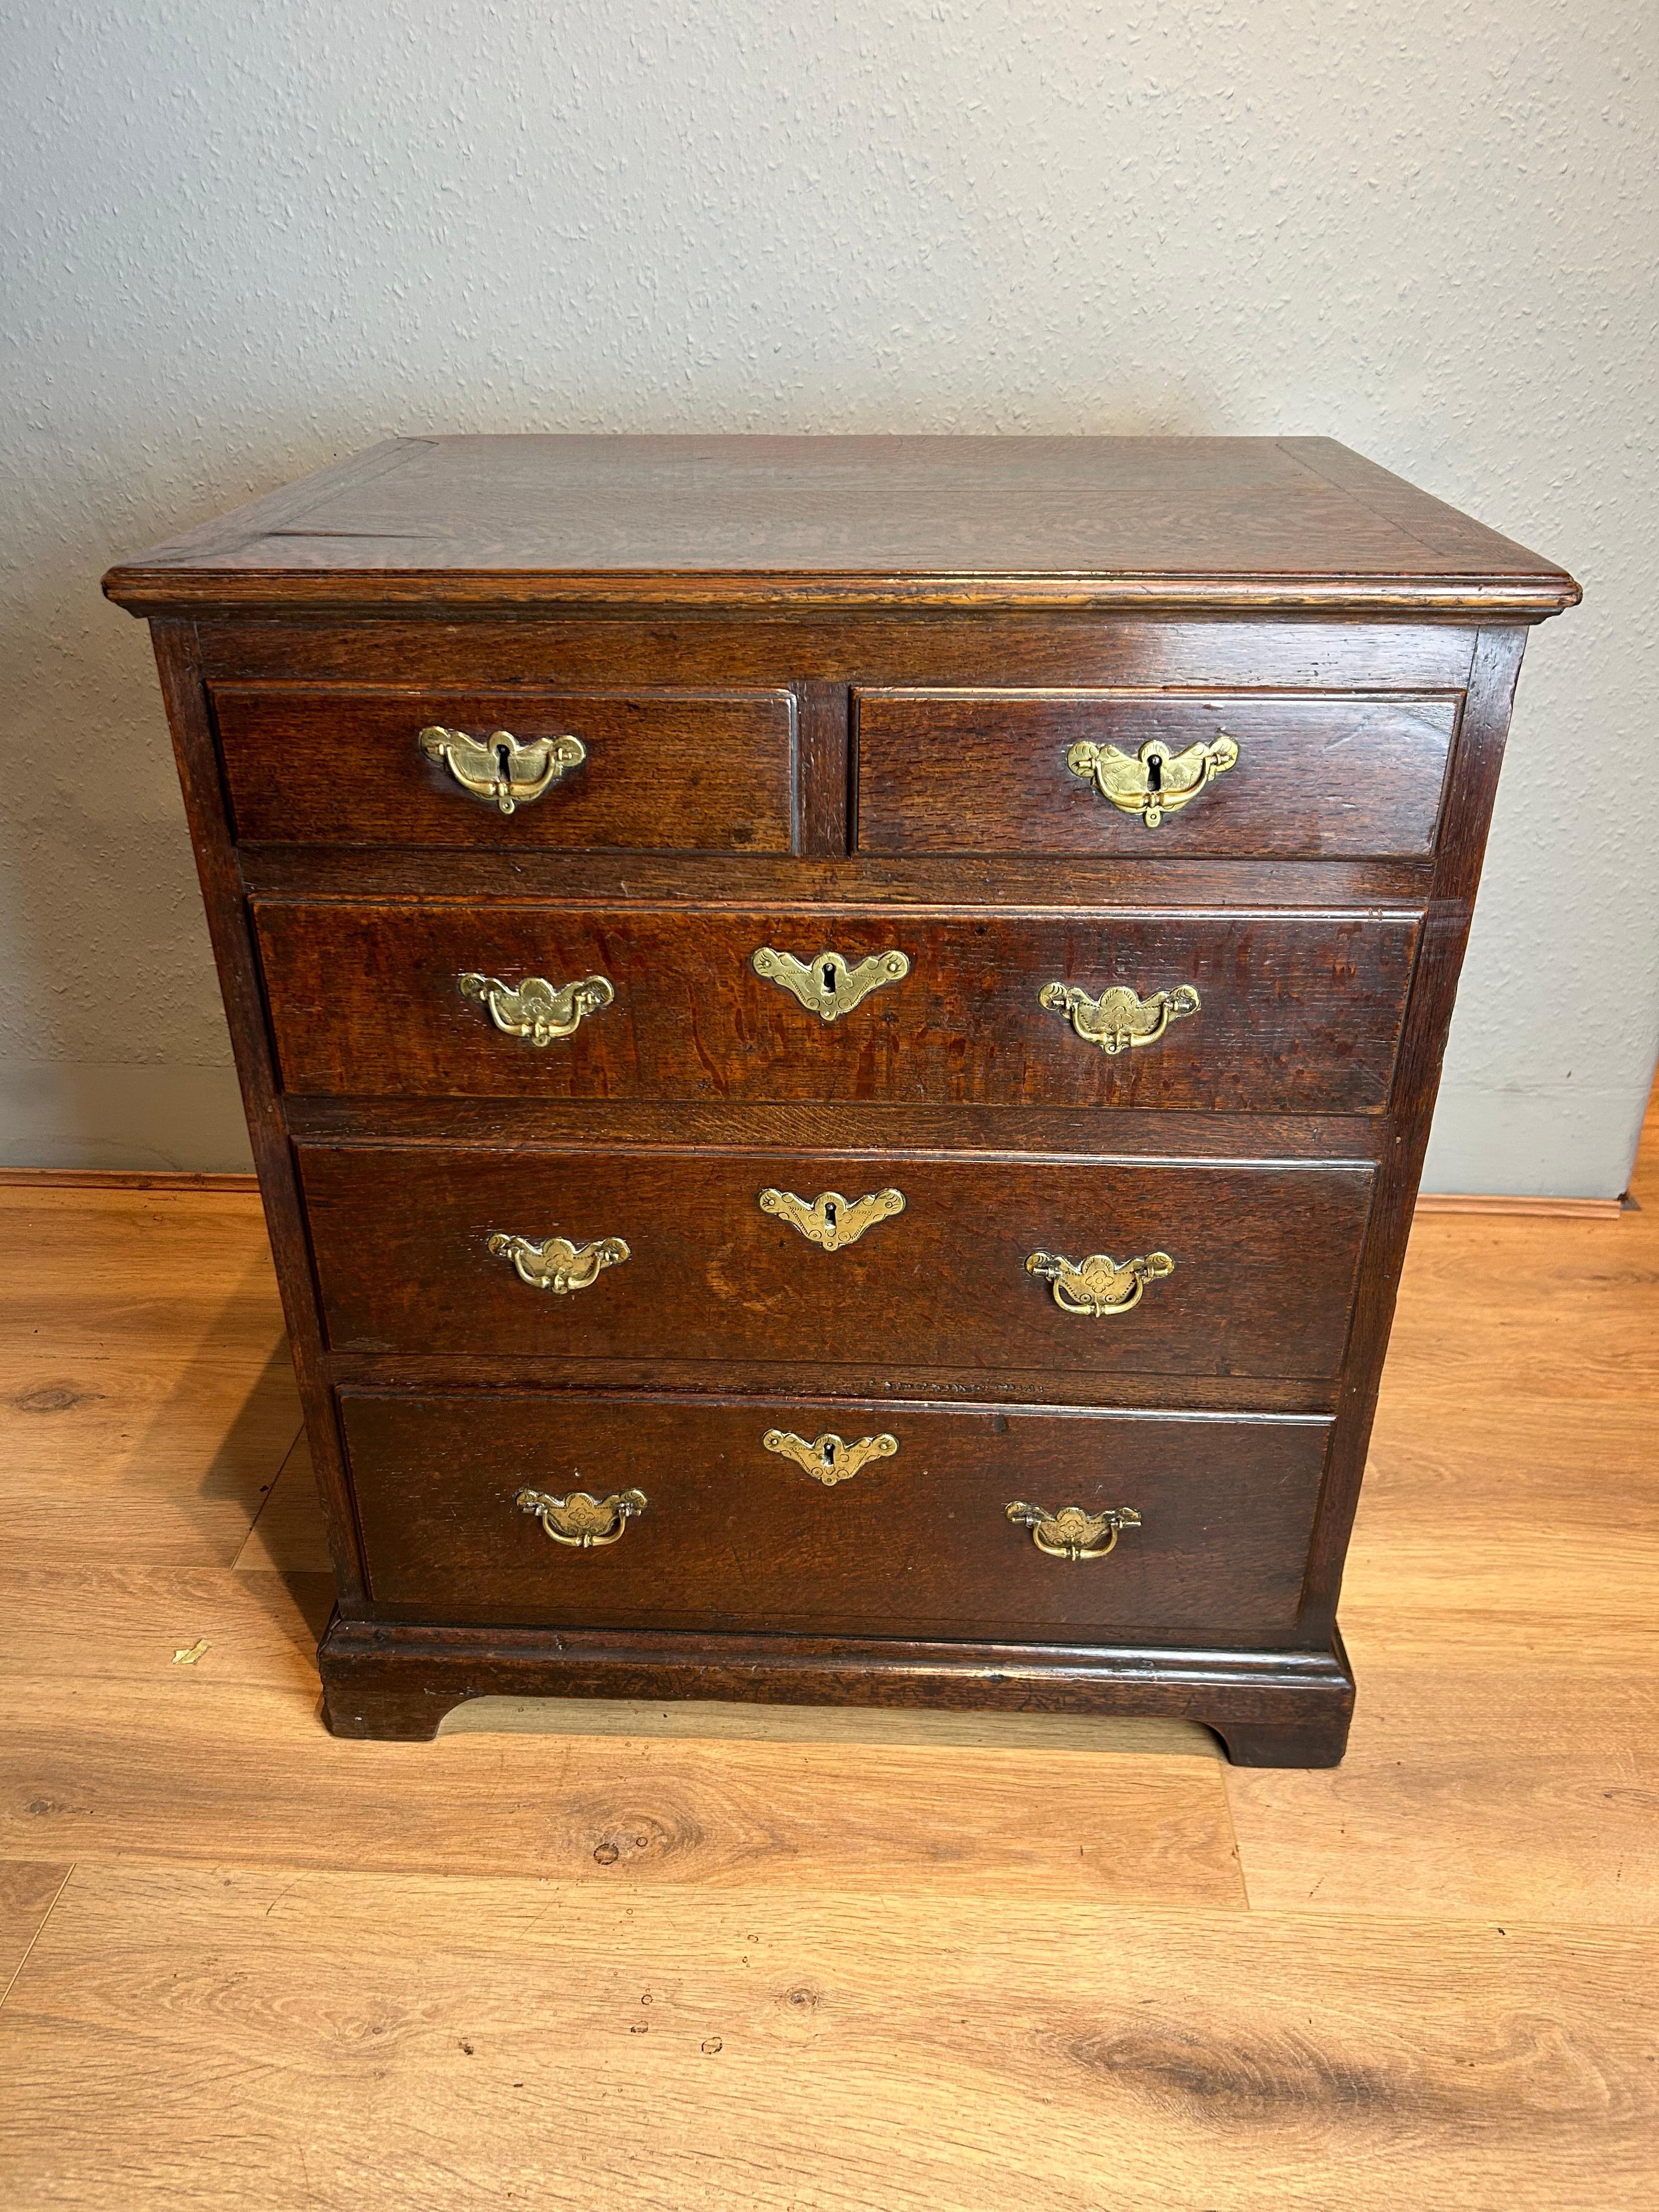 Antique English Queen Anne small chest of drawers circa 1710, rare sweet size only 25 inches wide, majority of chests this size are converted commodes but this one isn’t, the whole chest is made of oak including drawer linings, dust sheets, runners,